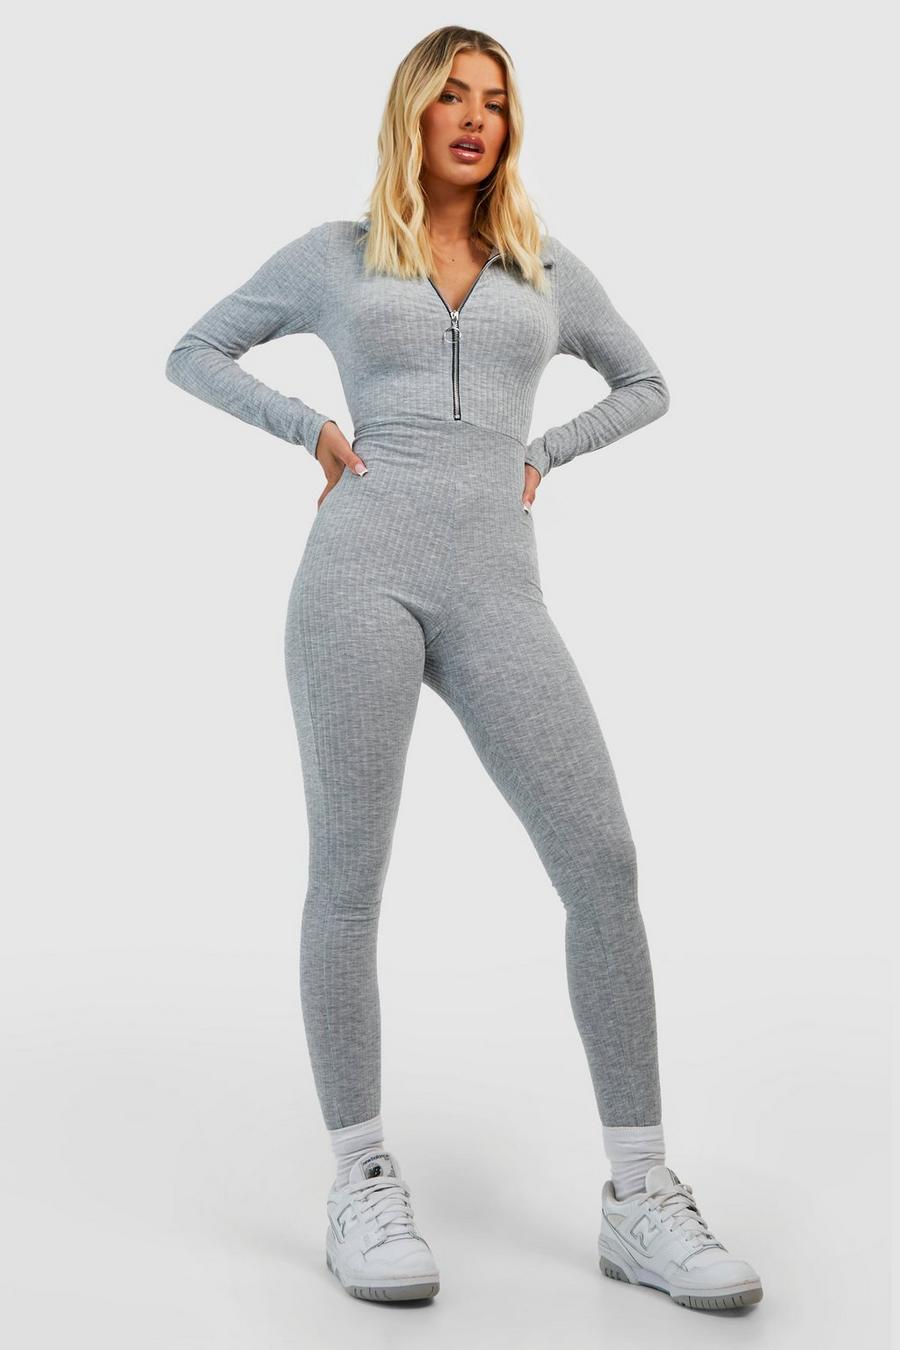 Cheap Women's Glossy Long Sleeve Jumpsuit Solid Stretch Full